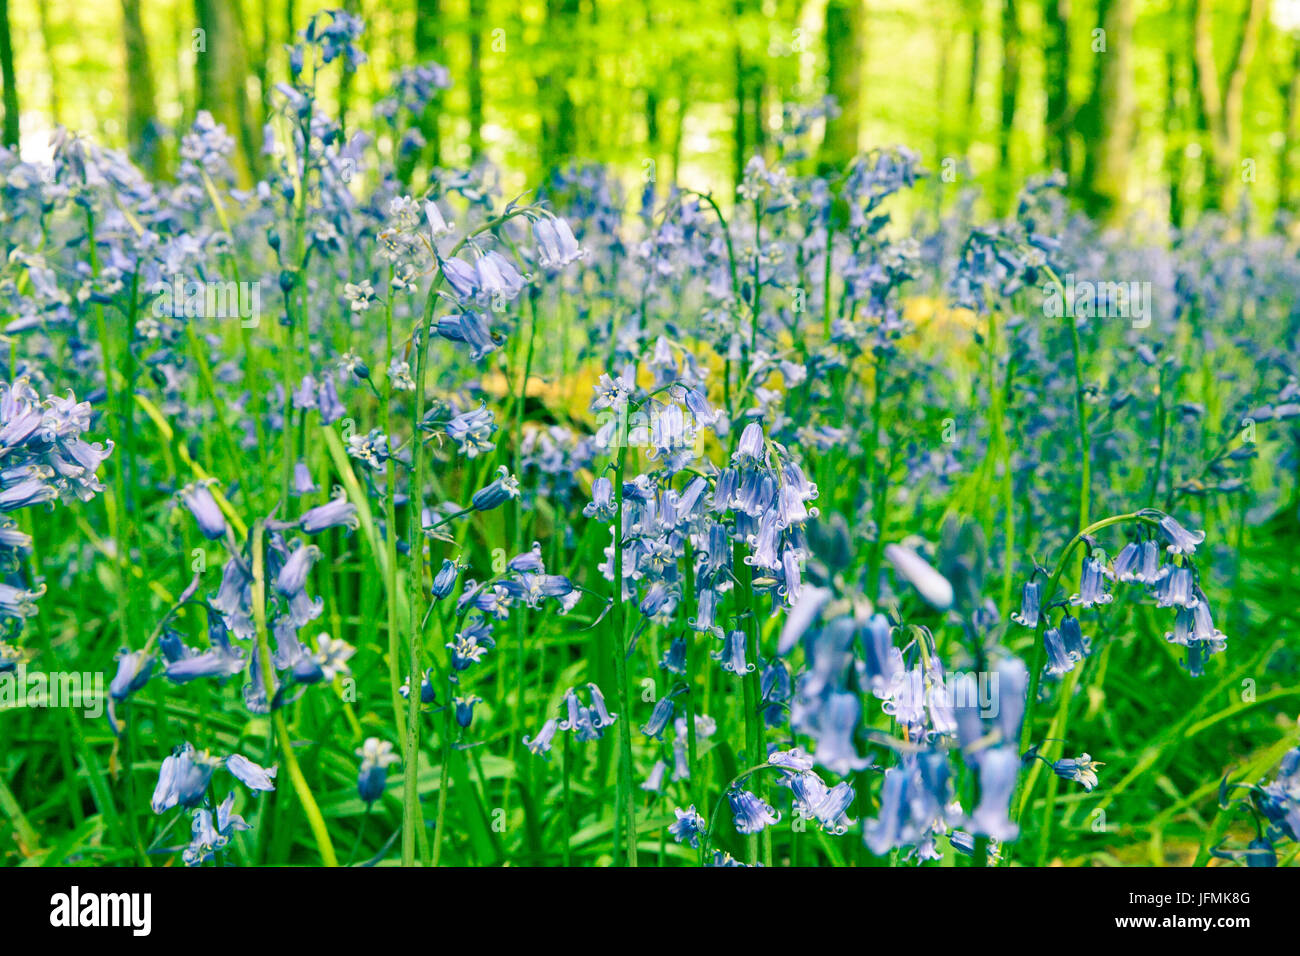 A close up of a patch of bluebells in English woodland Stock Photo